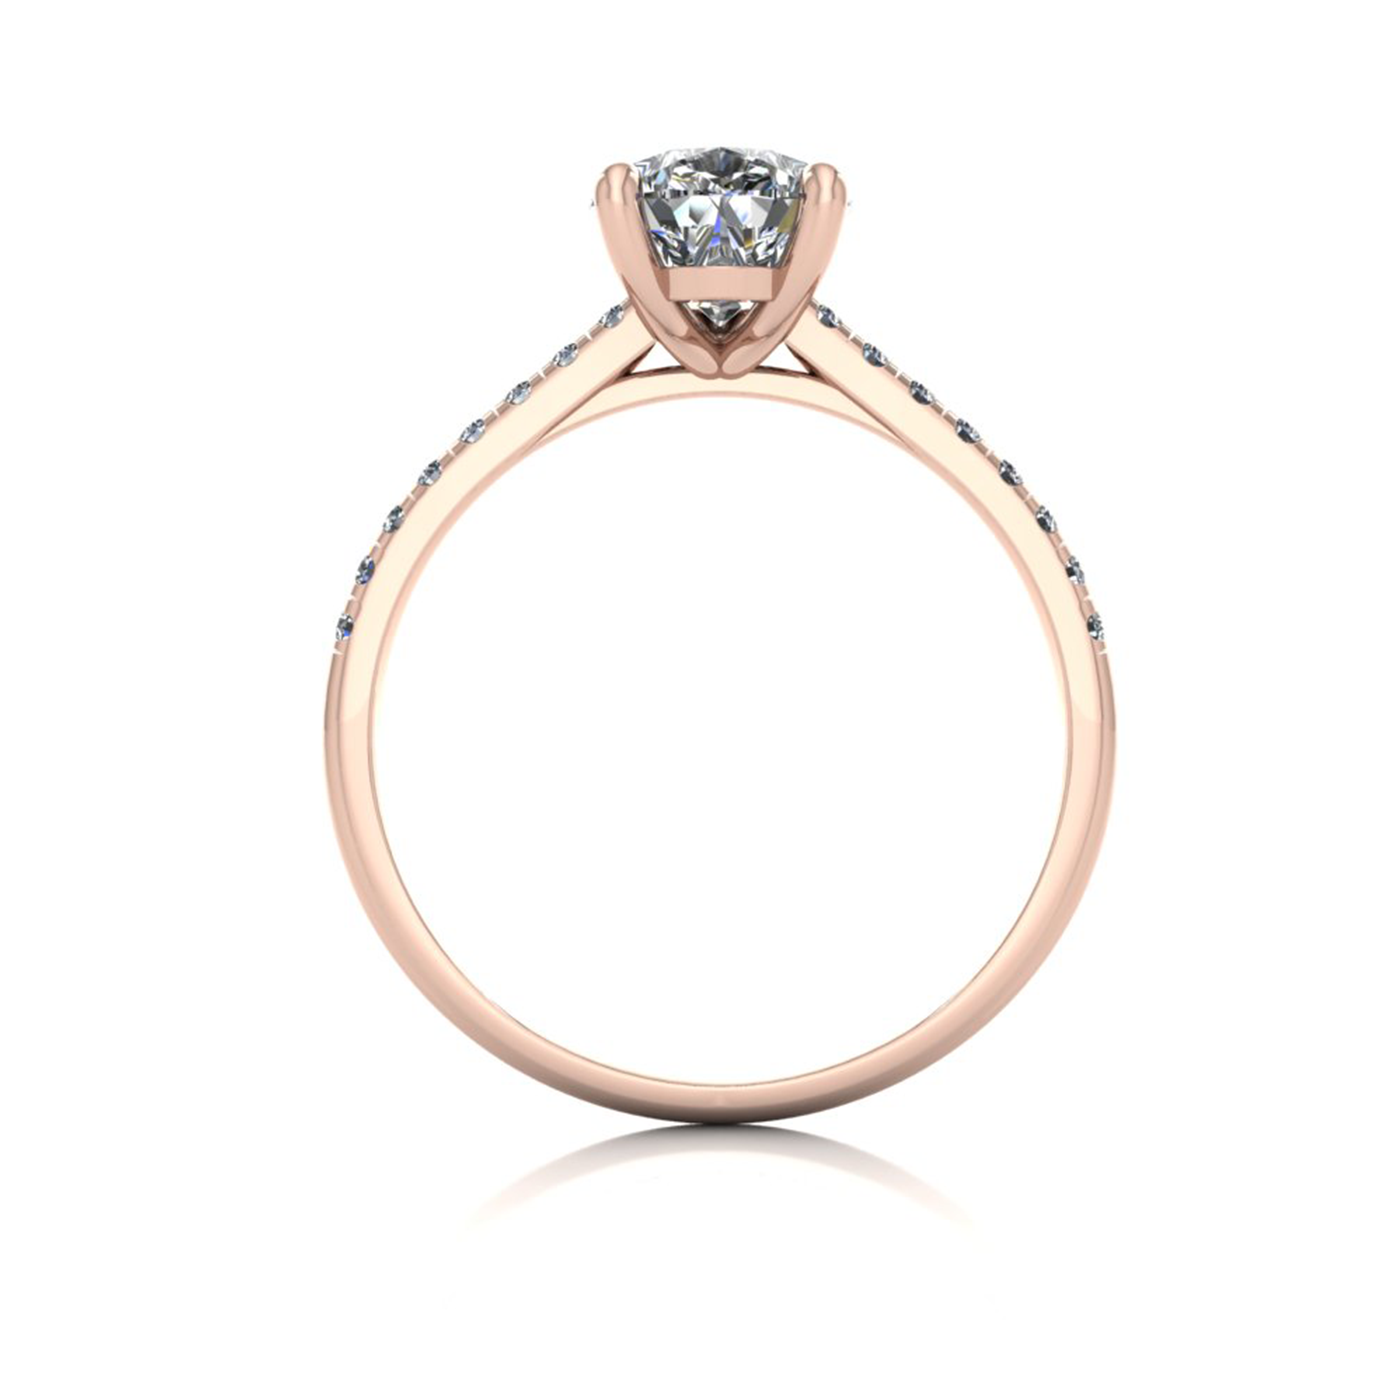 18k rose gold 1,50 ct 3 prongs pear cut diamond engagement ring with whisper thin pavÉ set band